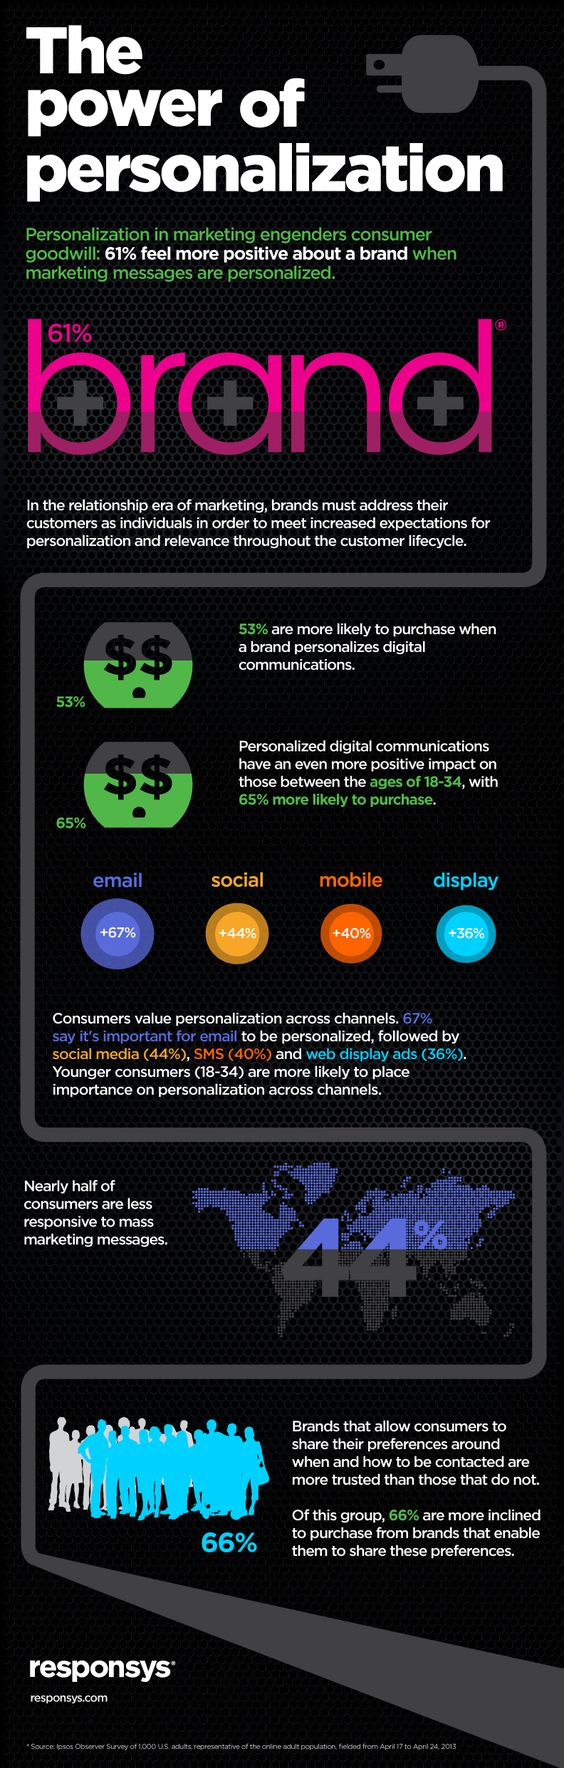 Infographic Of The Week: The Power Of Personalization In Digital Marketing